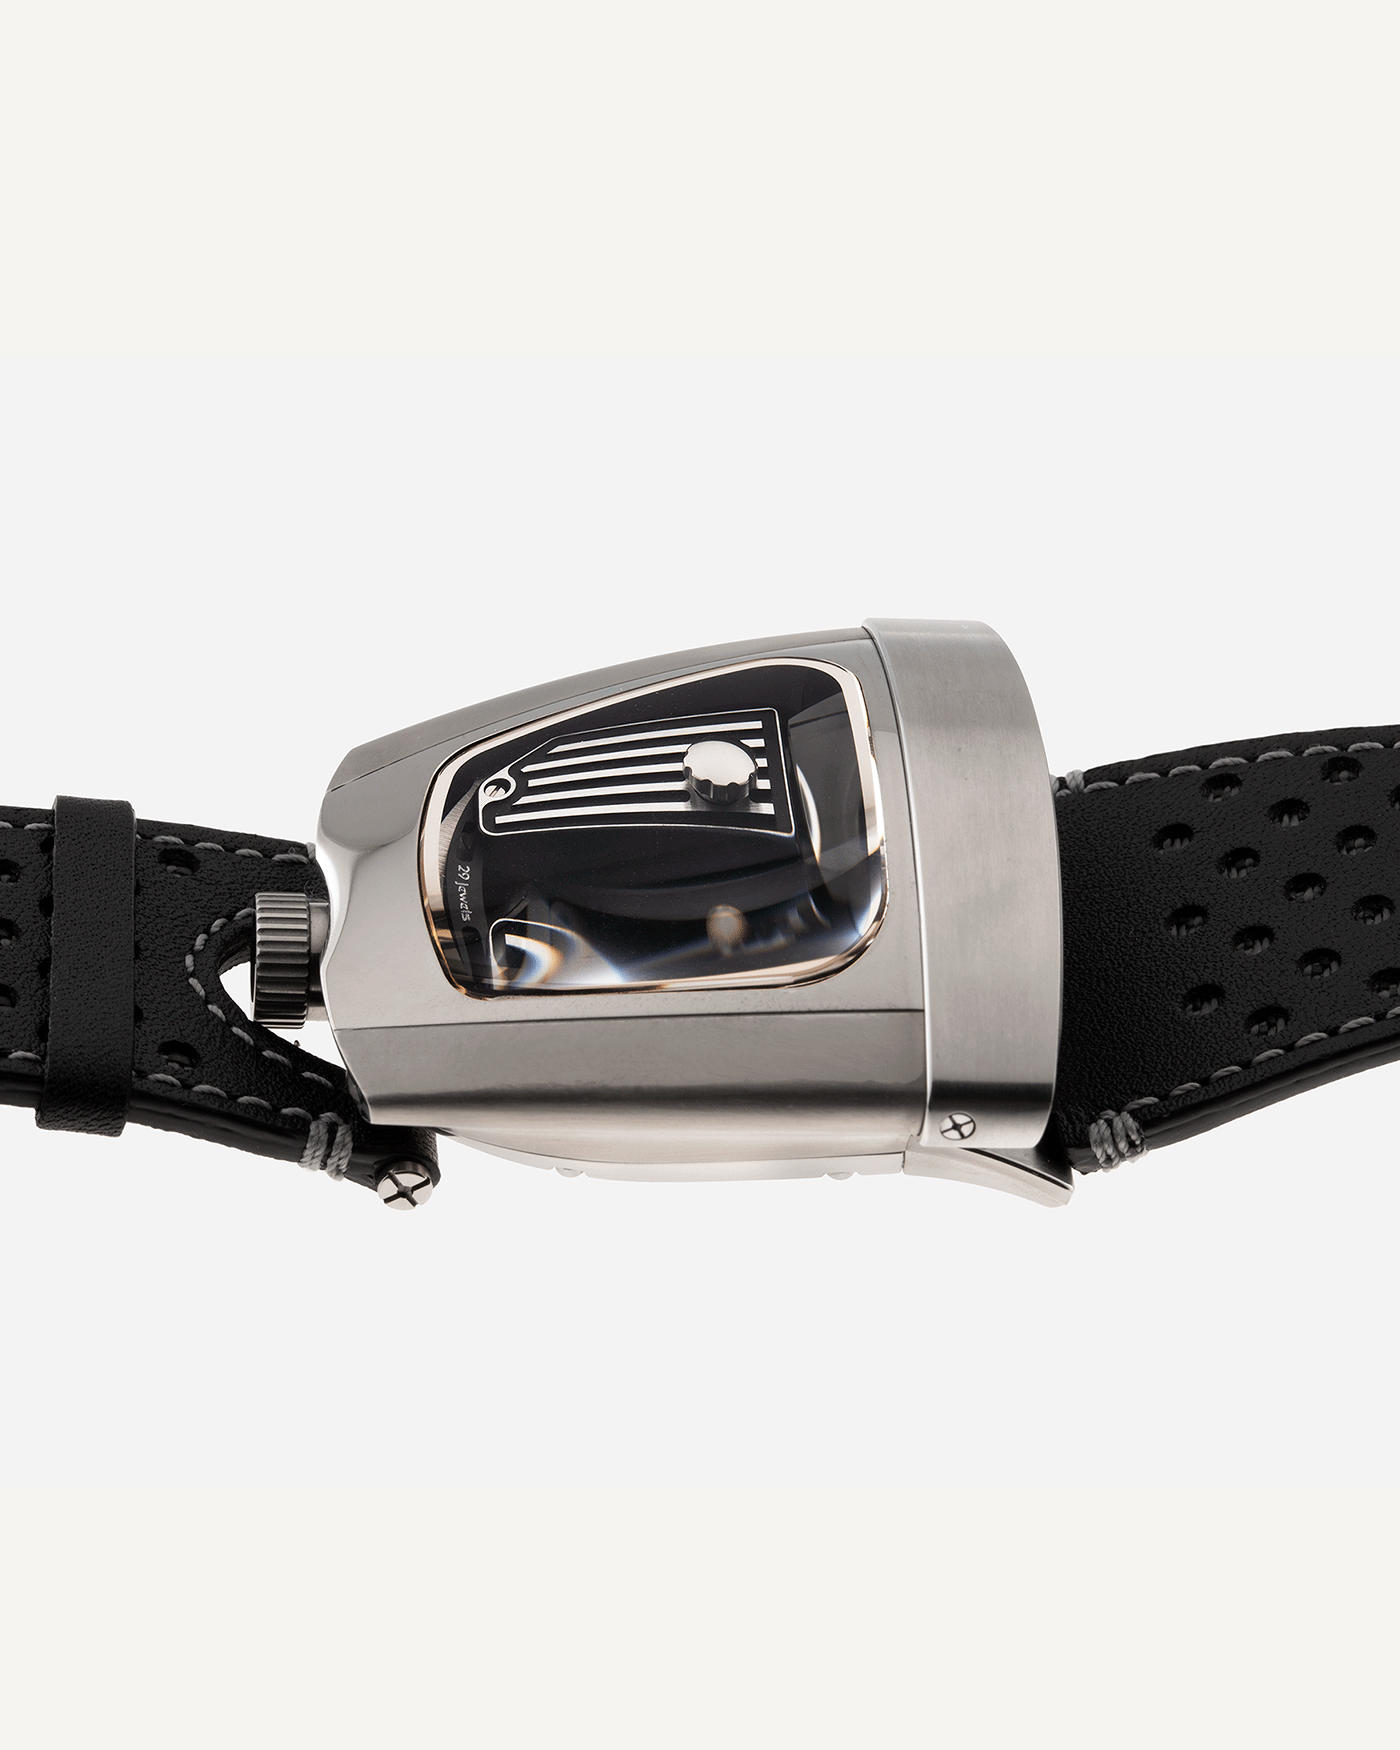 Brand: MB&F Year: 2018 Model: HMX Black Lotus 10th Anniversary Material: Stainless Steel and Titanium Movement: Selitta Based Self Winding Movement Case Diameter: 46.8 x 44.3 x 20.7 mm Bracelet/Strap: MB&F Black Leather Strap and Tang Buckle